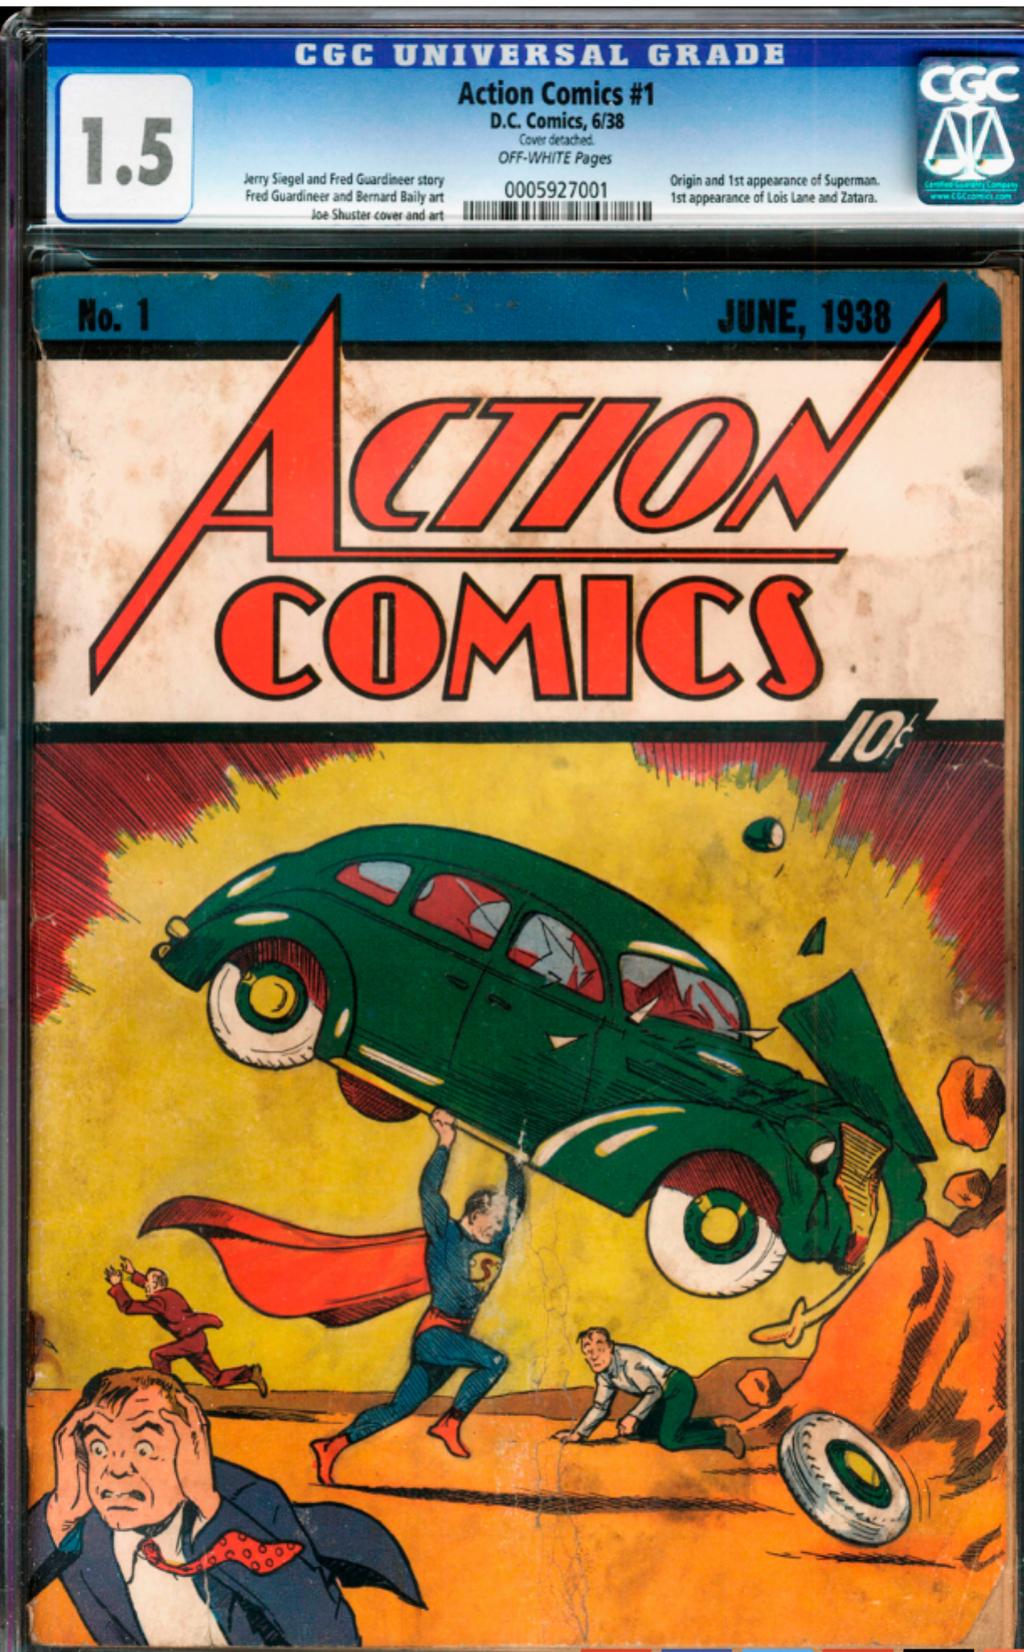 5) Suppose you are the owner of a pristine copy of Action Comic No.1, the first comic book to feature Superman3. You would like to sell this item in a closed bid auction.